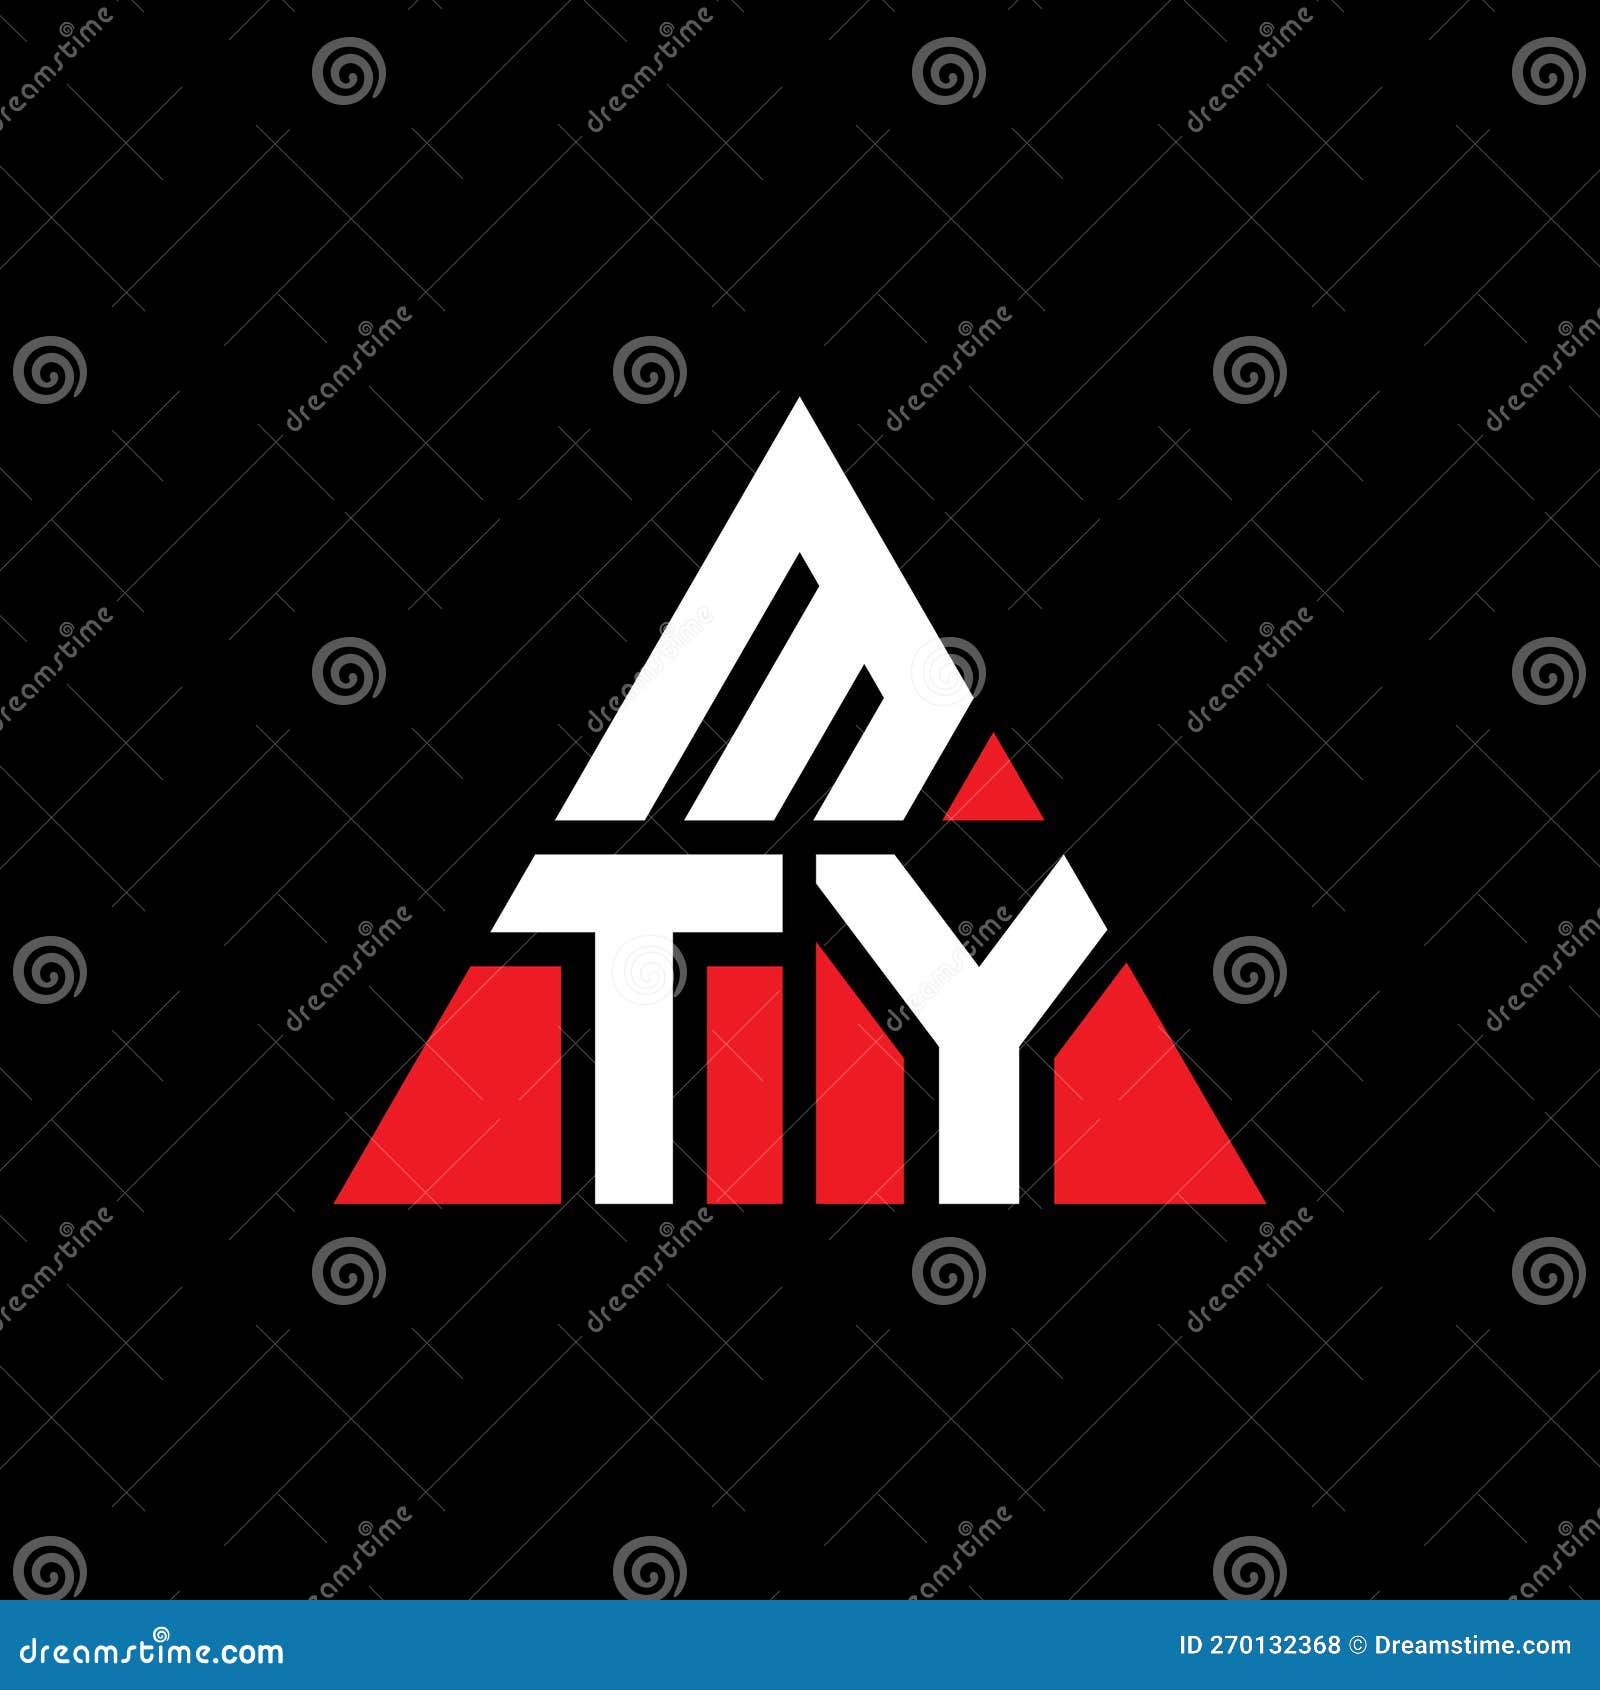 mty triangle letter logo  with triangle . mty triangle logo  monogram. mty triangle  logo template with red